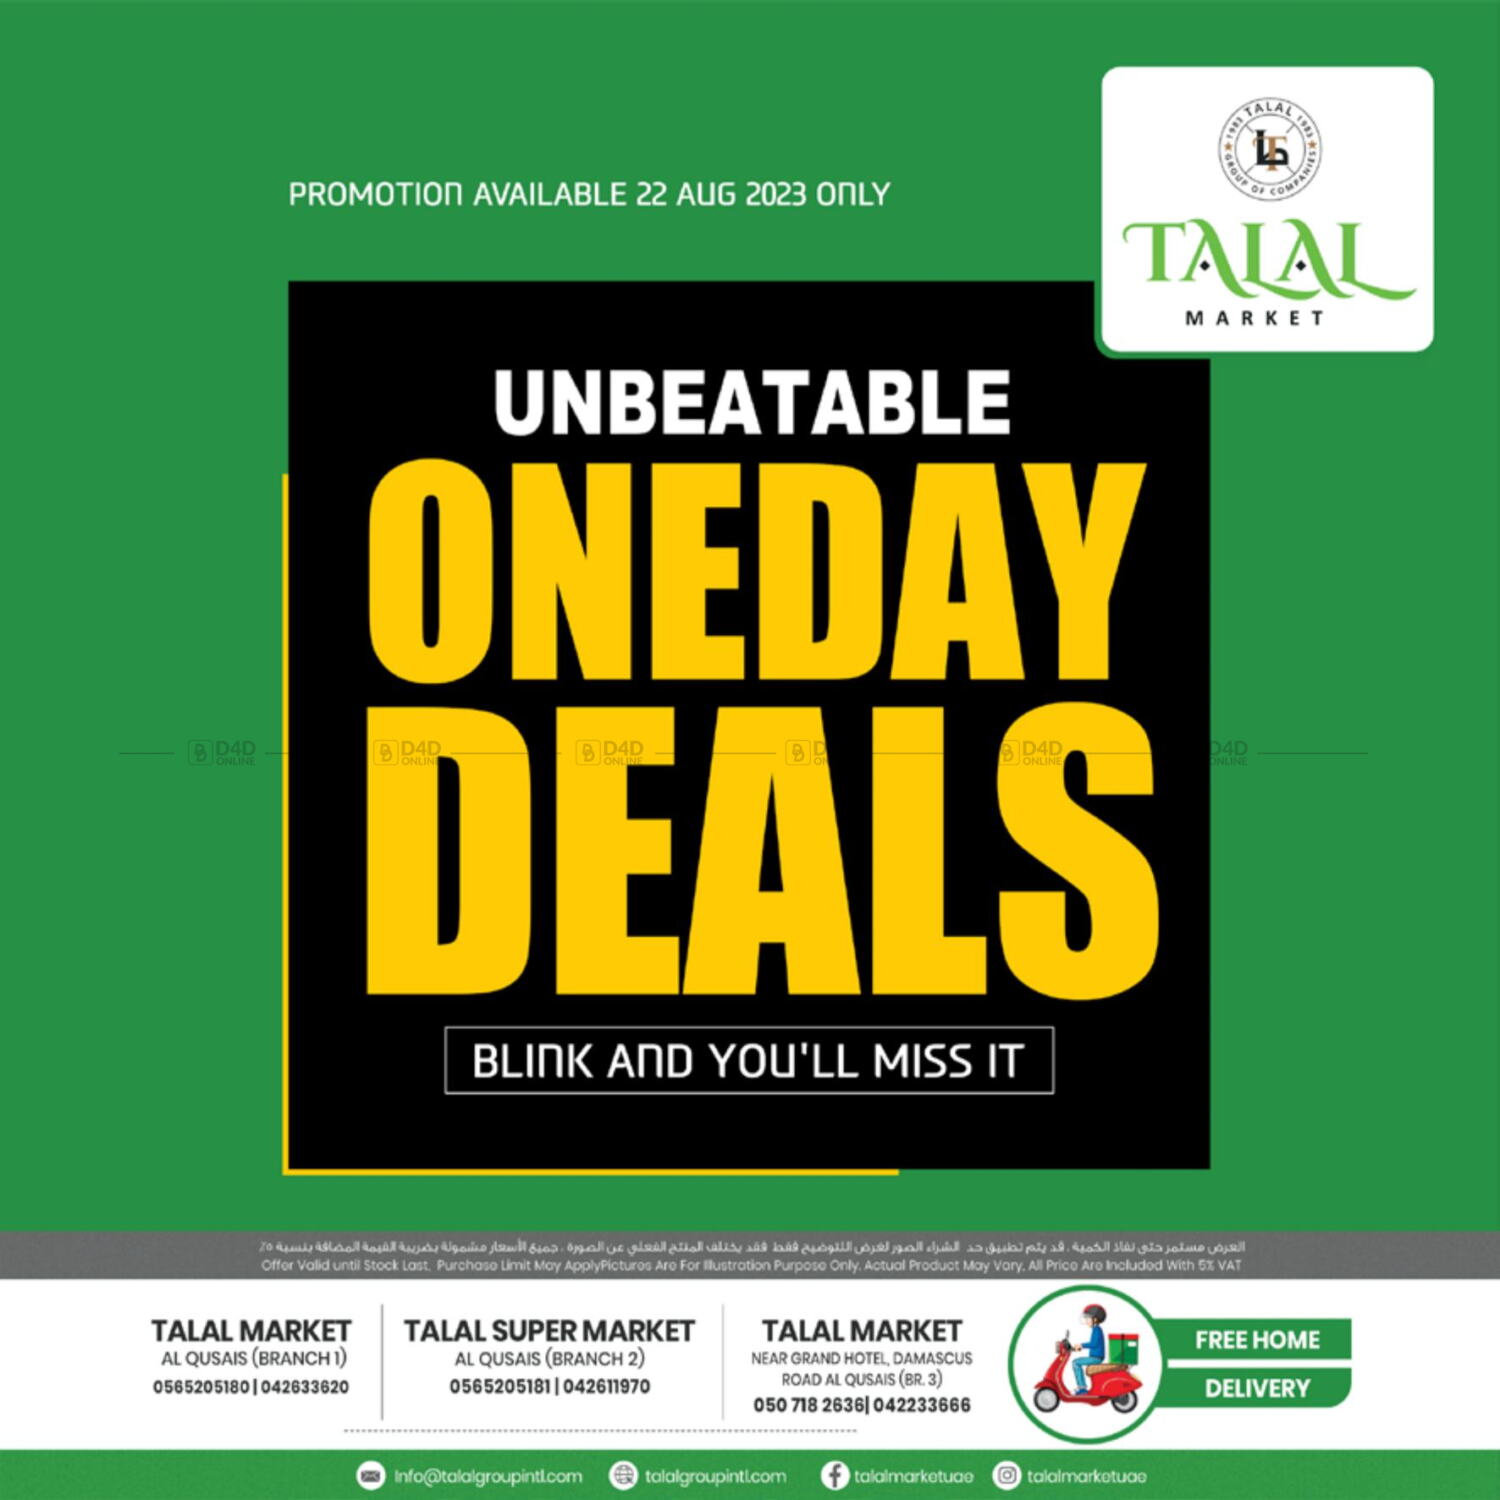 TALAL MARKET ONE DAY DEAL